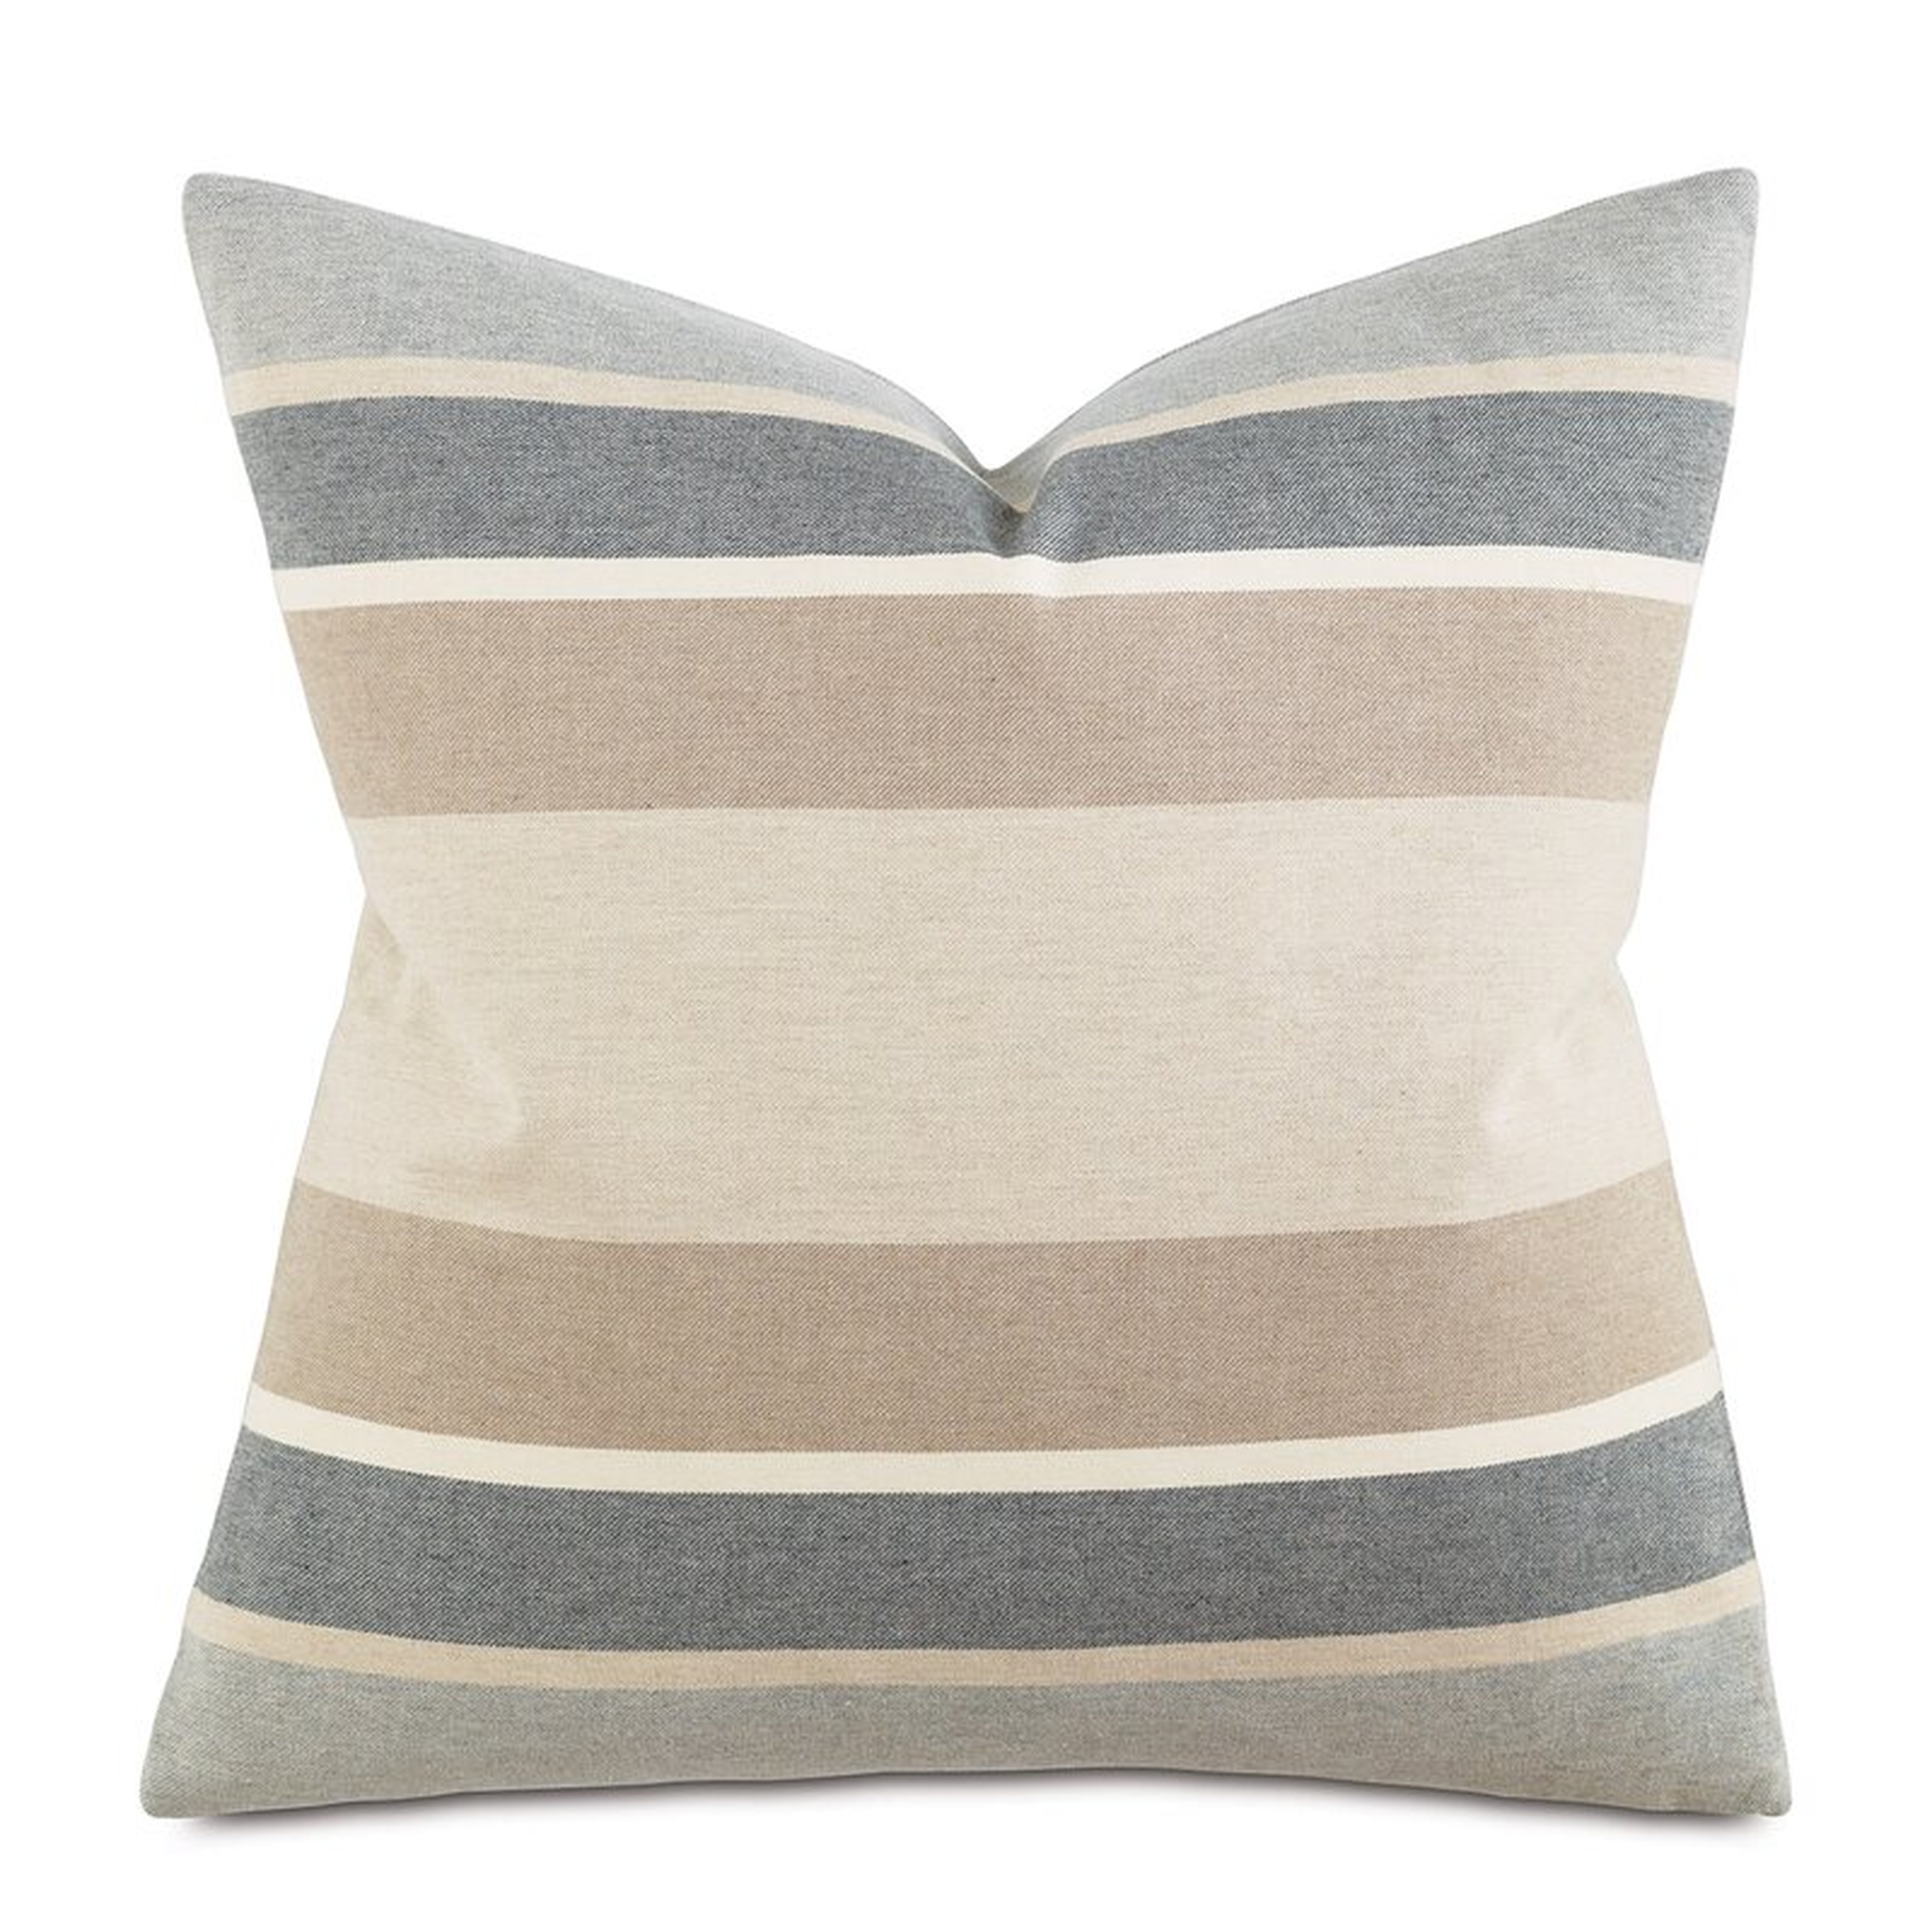 Eastern Accents Gentry Striped Throw Pillow - Perigold